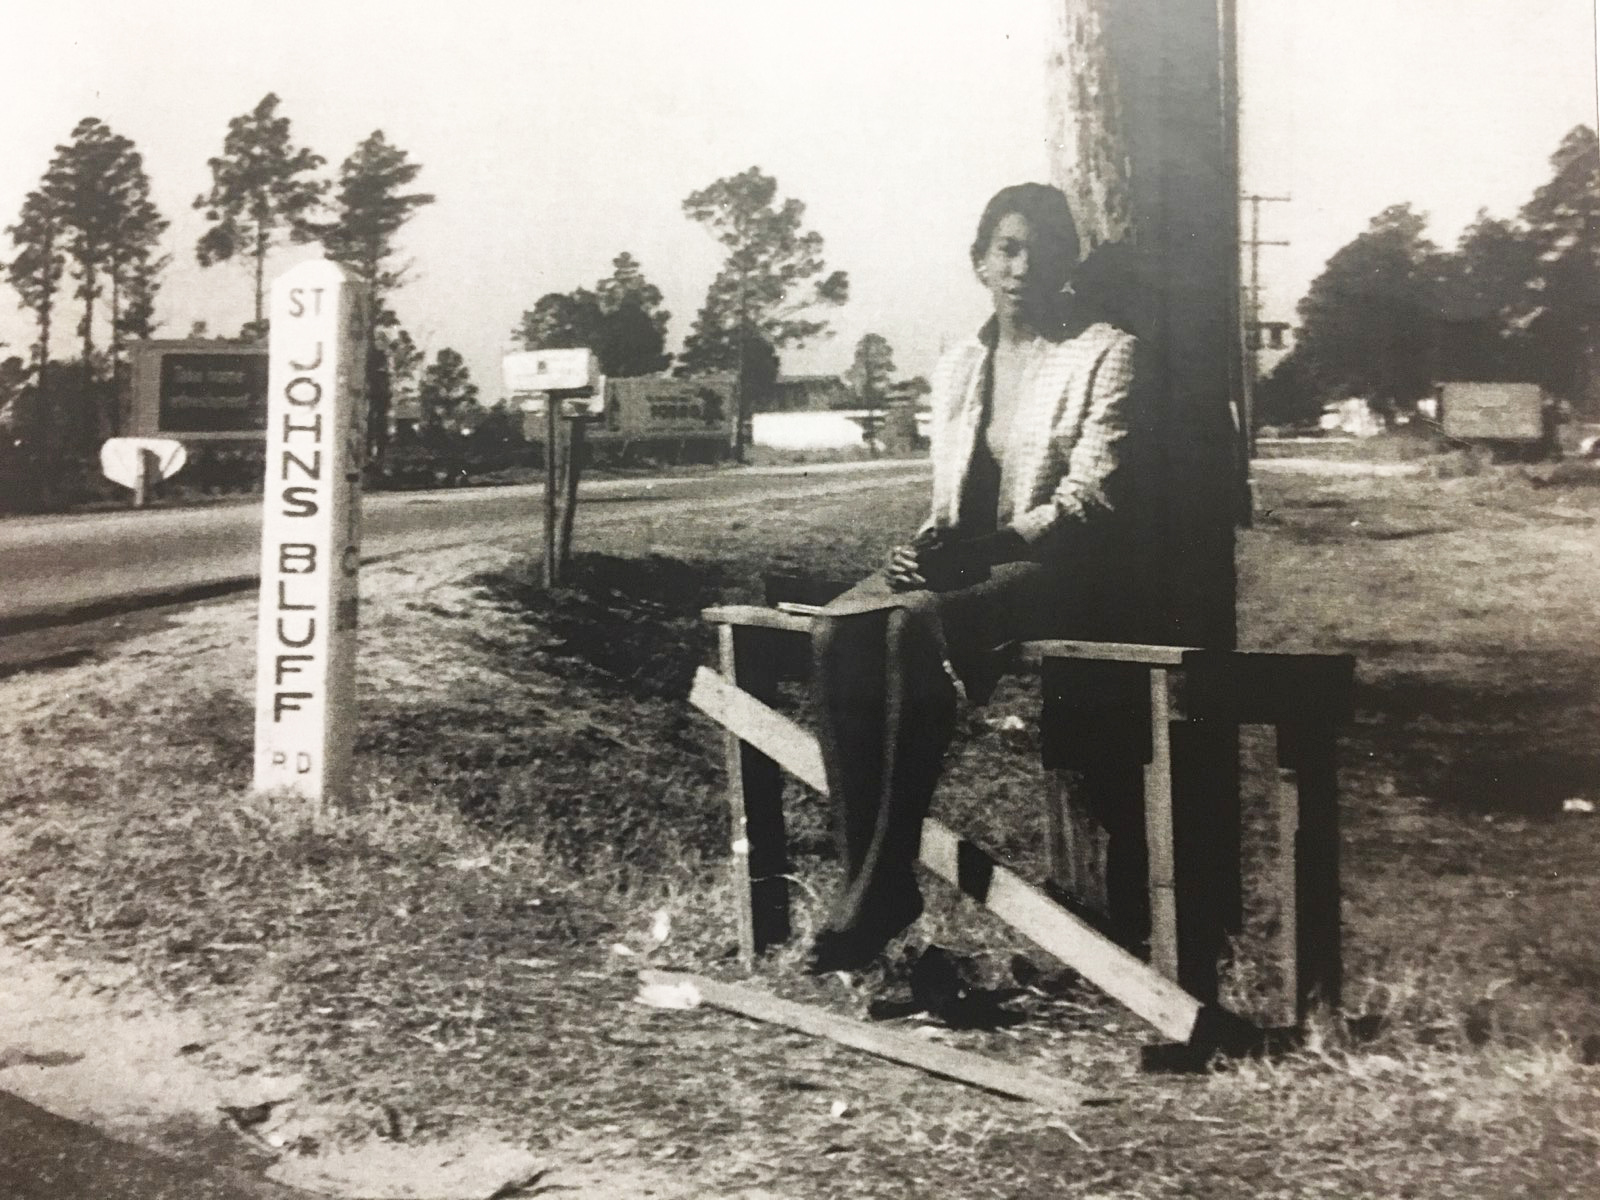 This photograph, from about 1952, shows a young woman on a bench built by her father so she would have a place to sit while waiting for a bus. The photograph inspired the Jacksonville Jaycees to install about 1,200 benches.